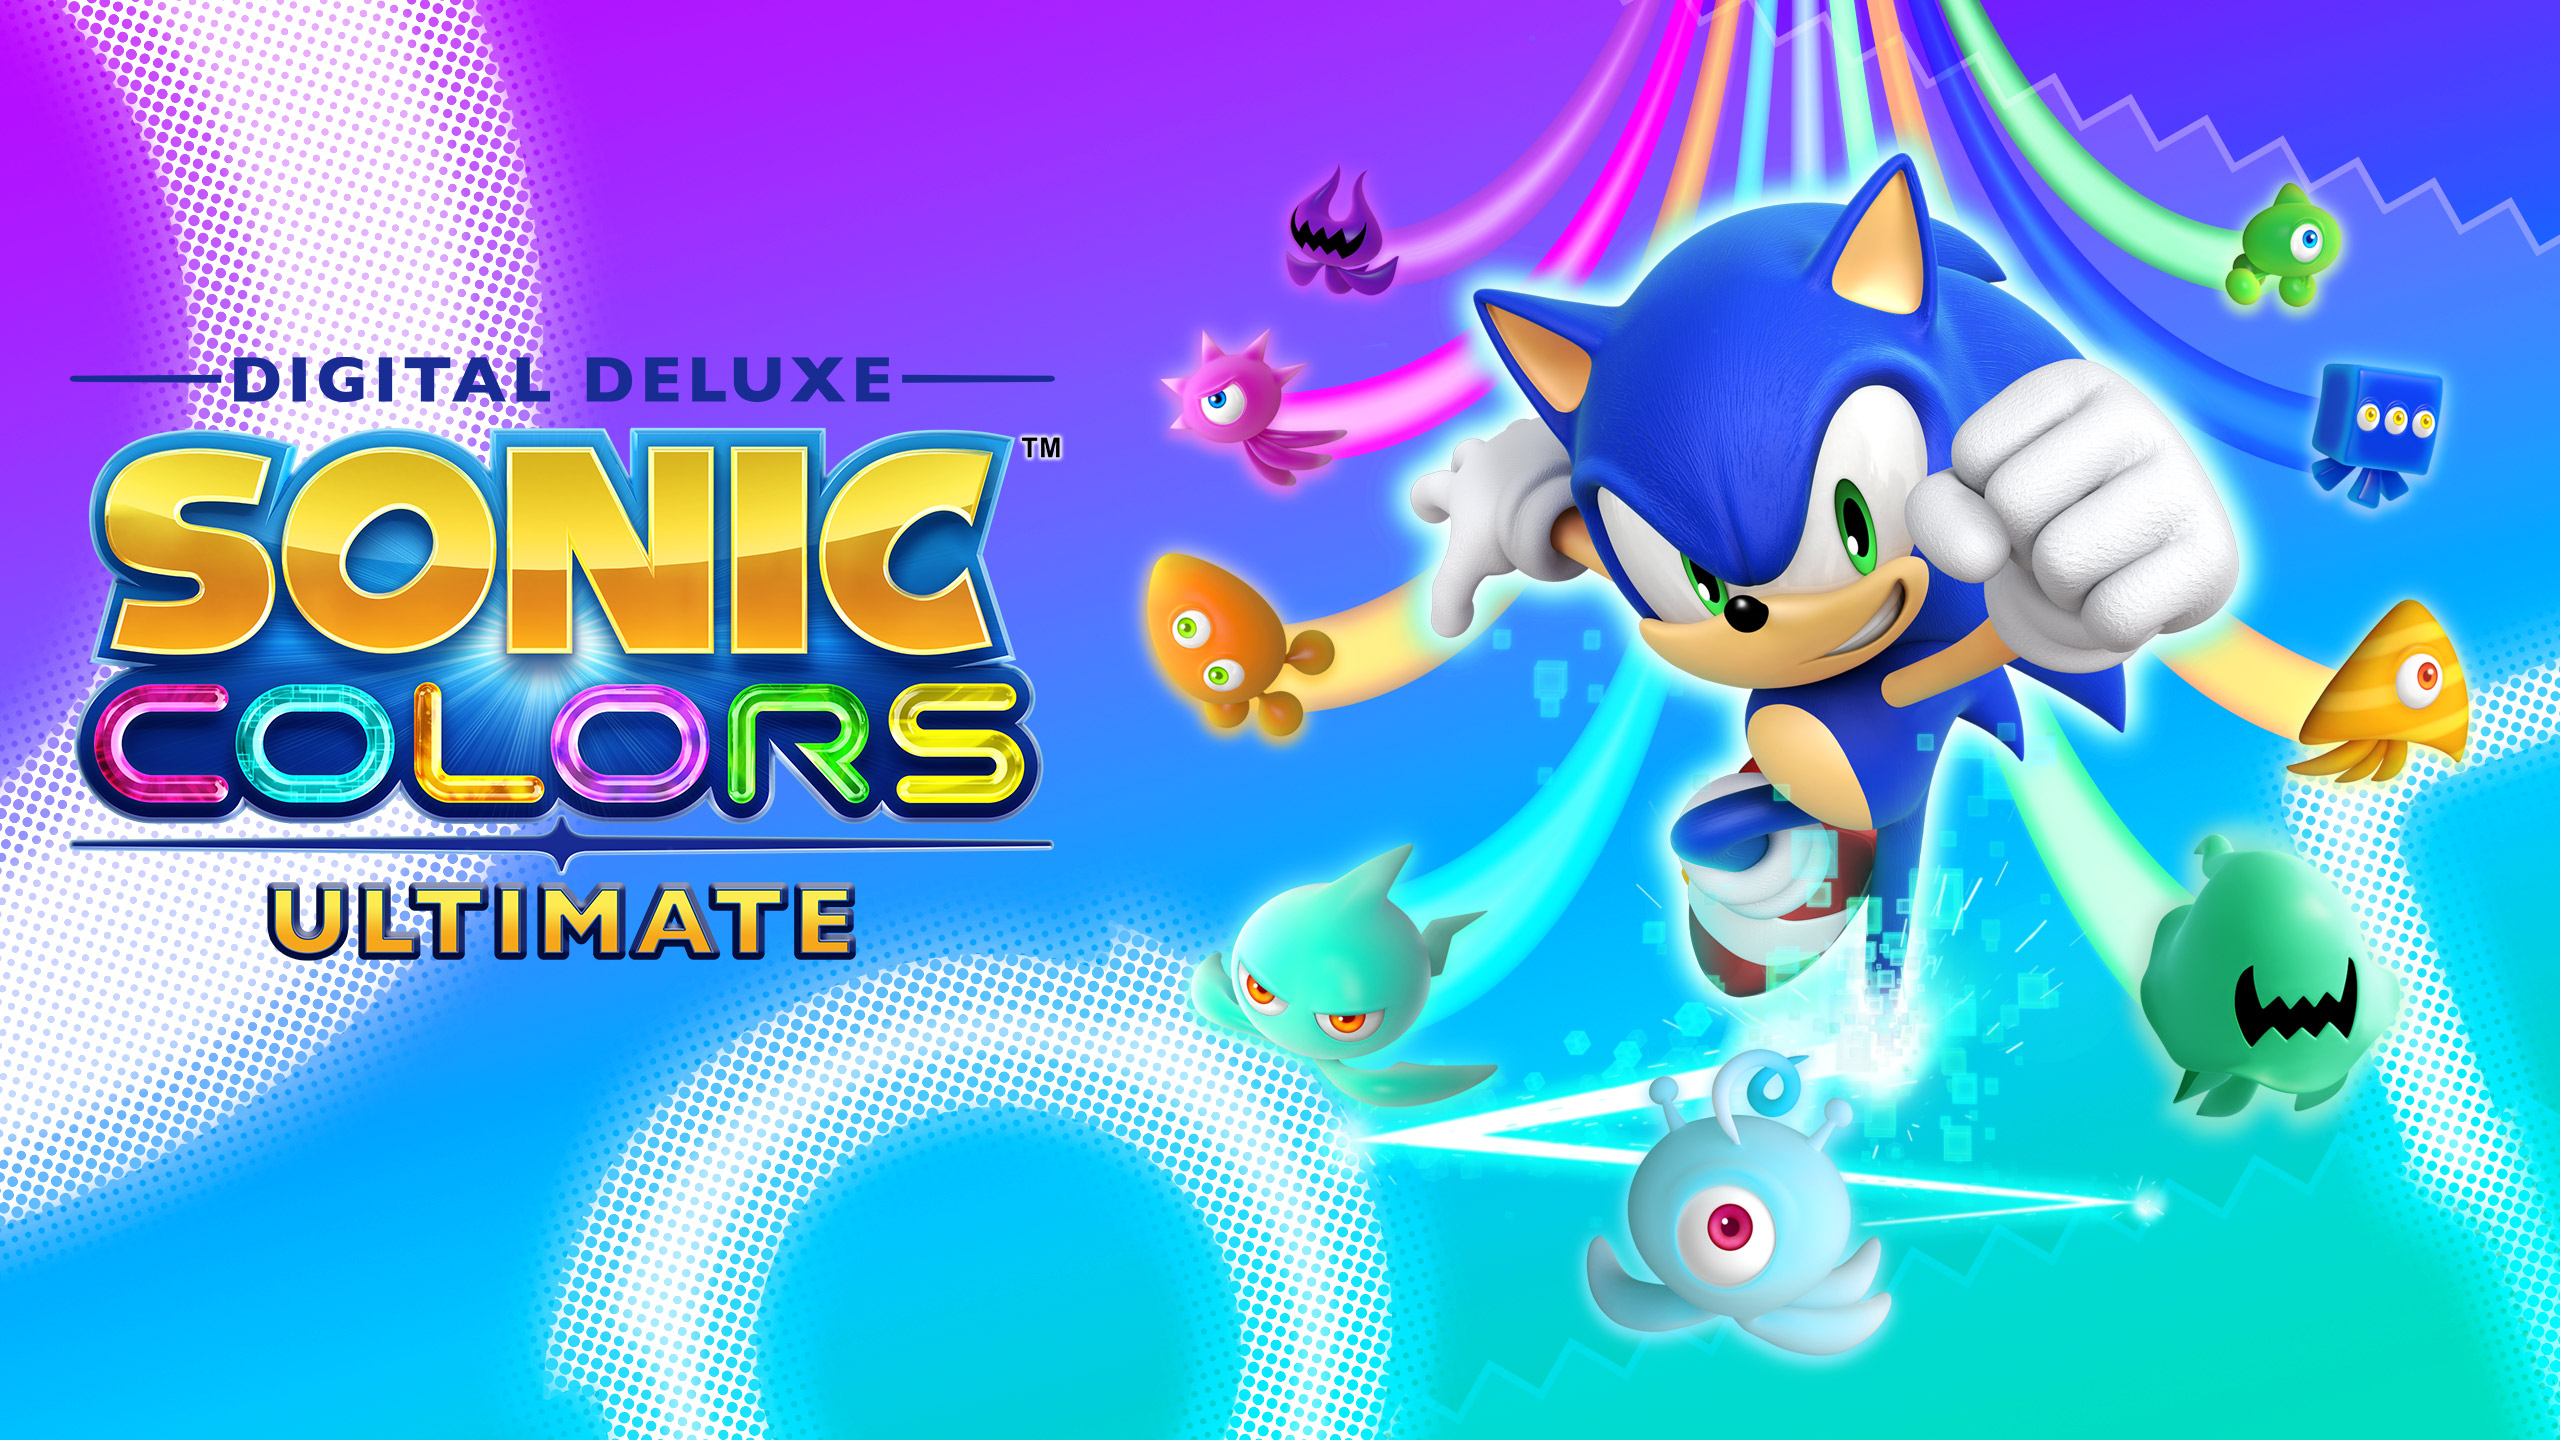 Sonic Colours Ultimate patch on the way to figere launch proventus!